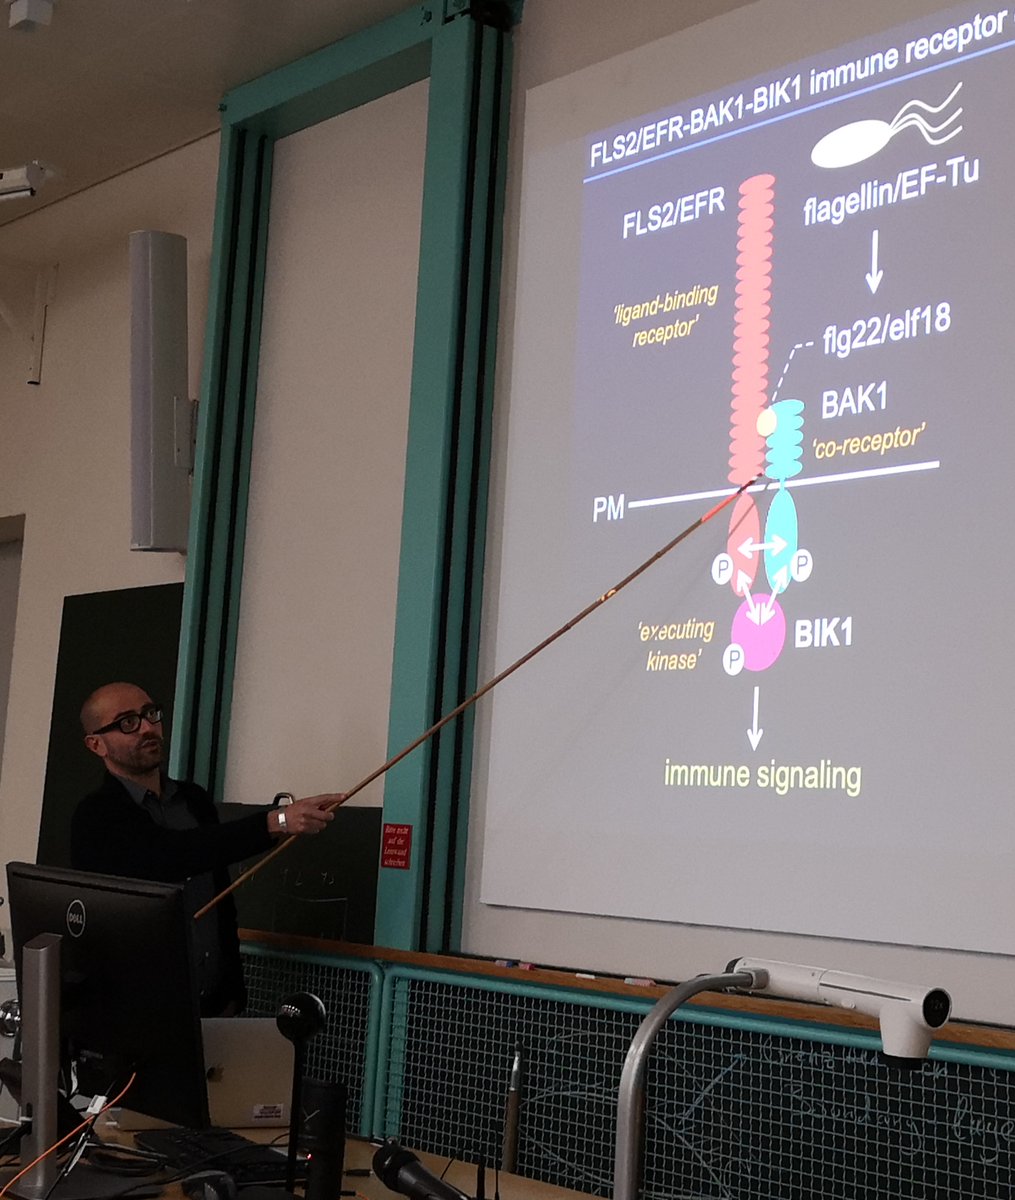 Thank you Cyril Zipfel #UZH for the very inspiring (pep)talk about #plantsci @unibern. Understanding plant immunity at the cellular and molecular level is fascinating and so relevant for plant/crop protection programs! #chemicalecology #CellBiology #plantimmunity @IobcIr